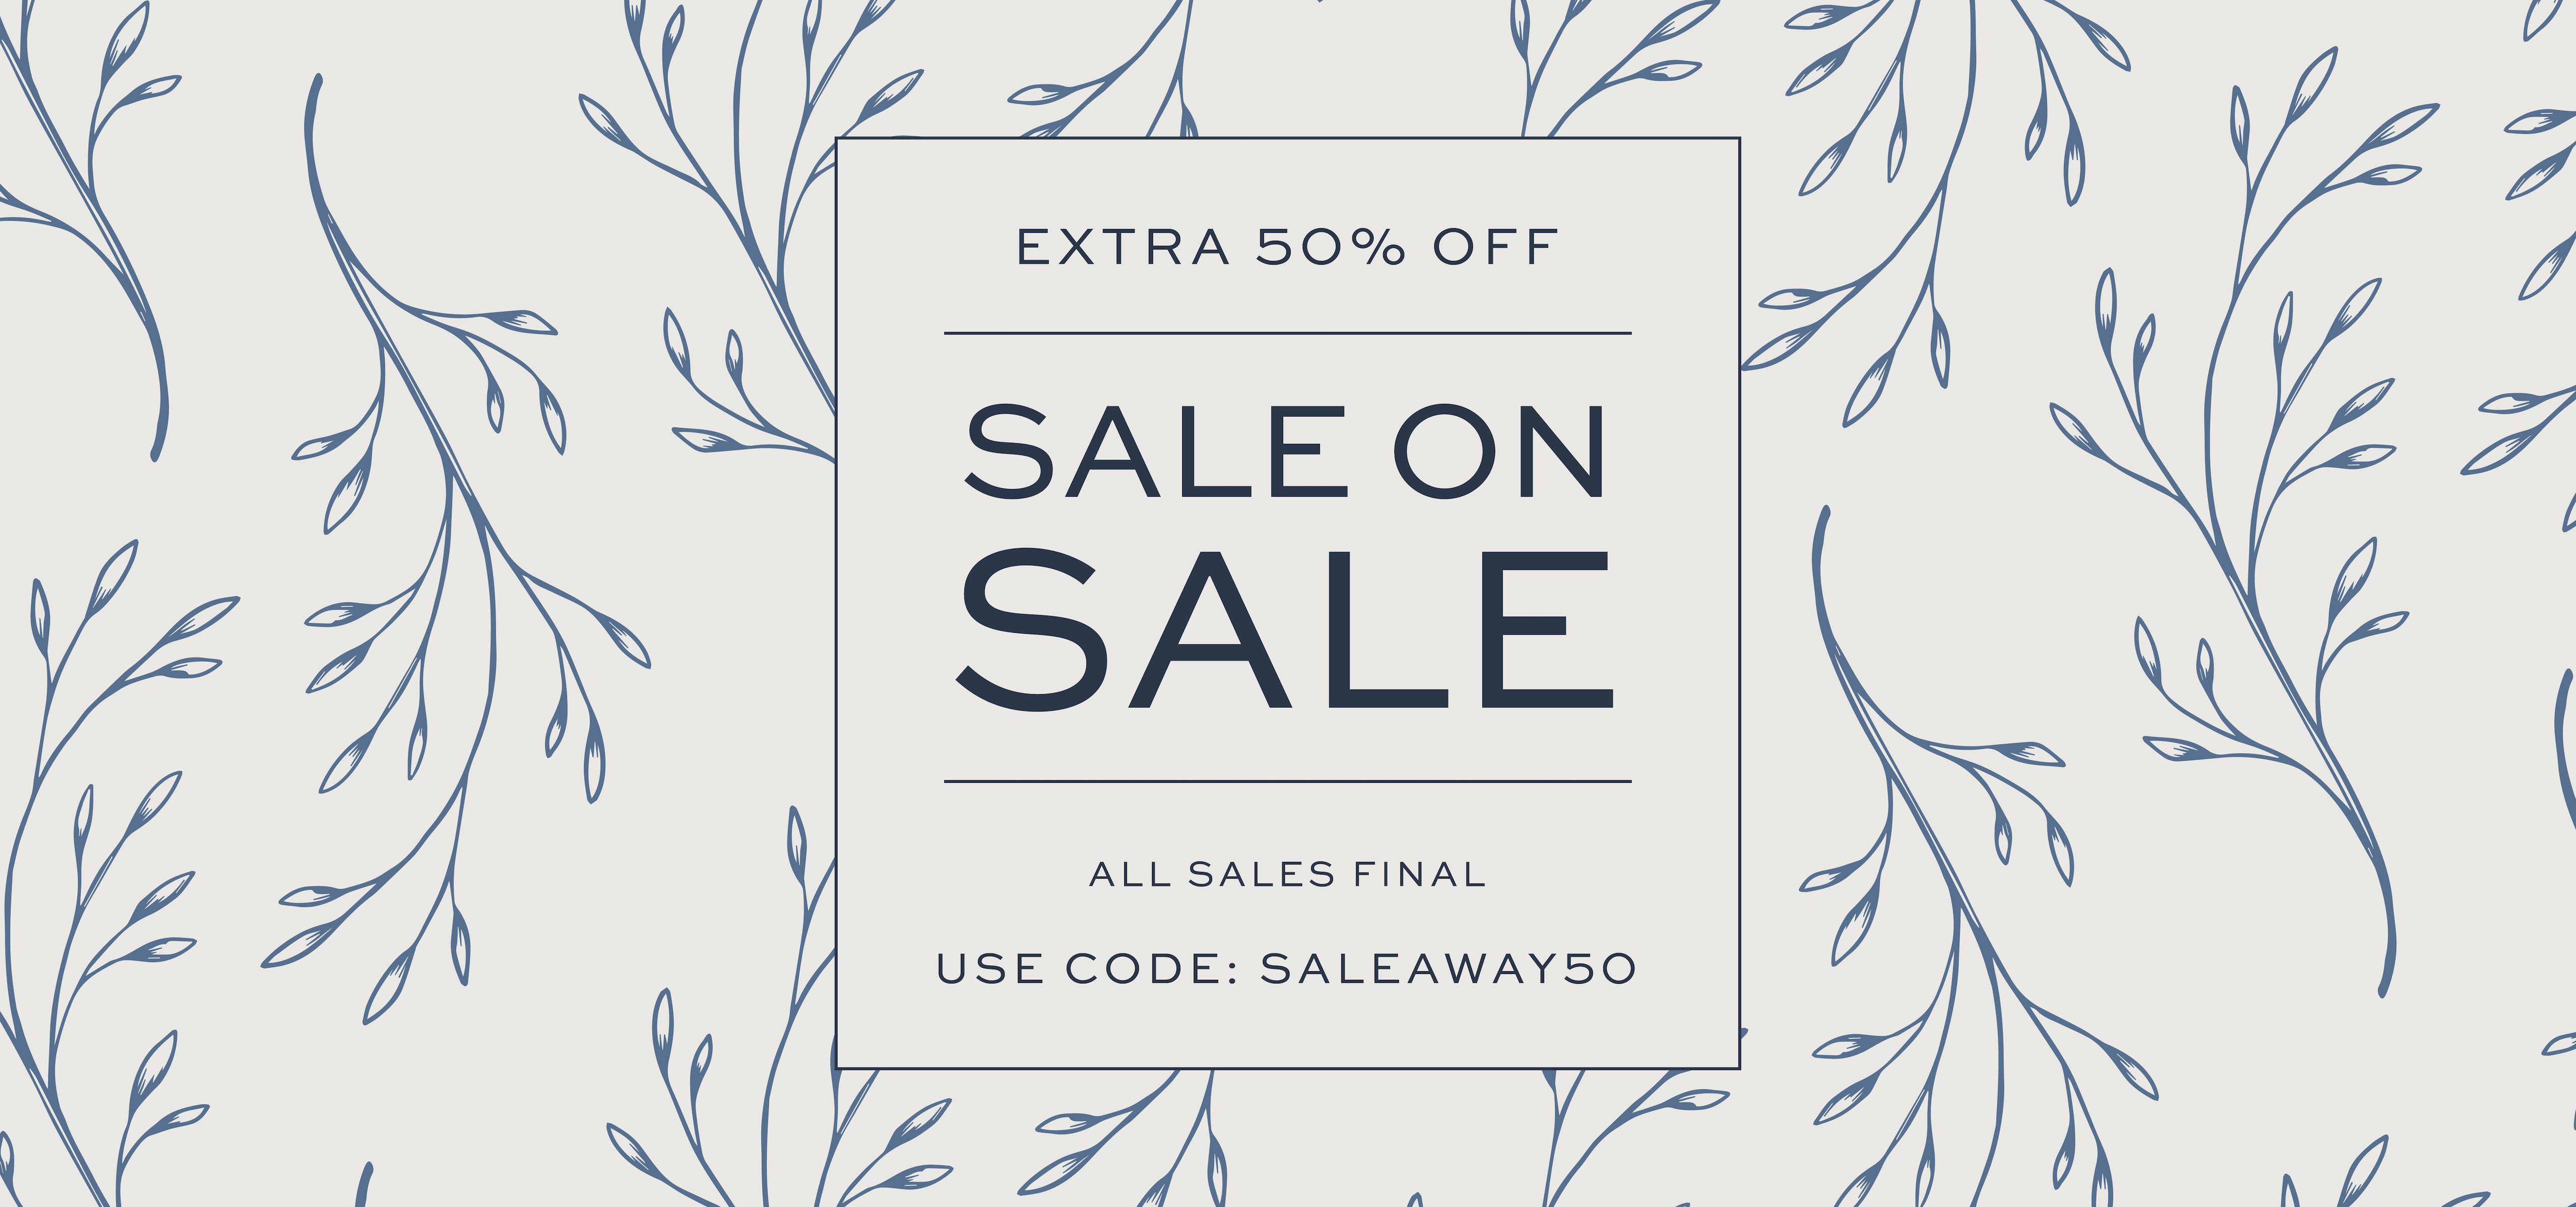 50% off Bliss' sale collection with code SALEAWAY50 now through April 29. All sales final.